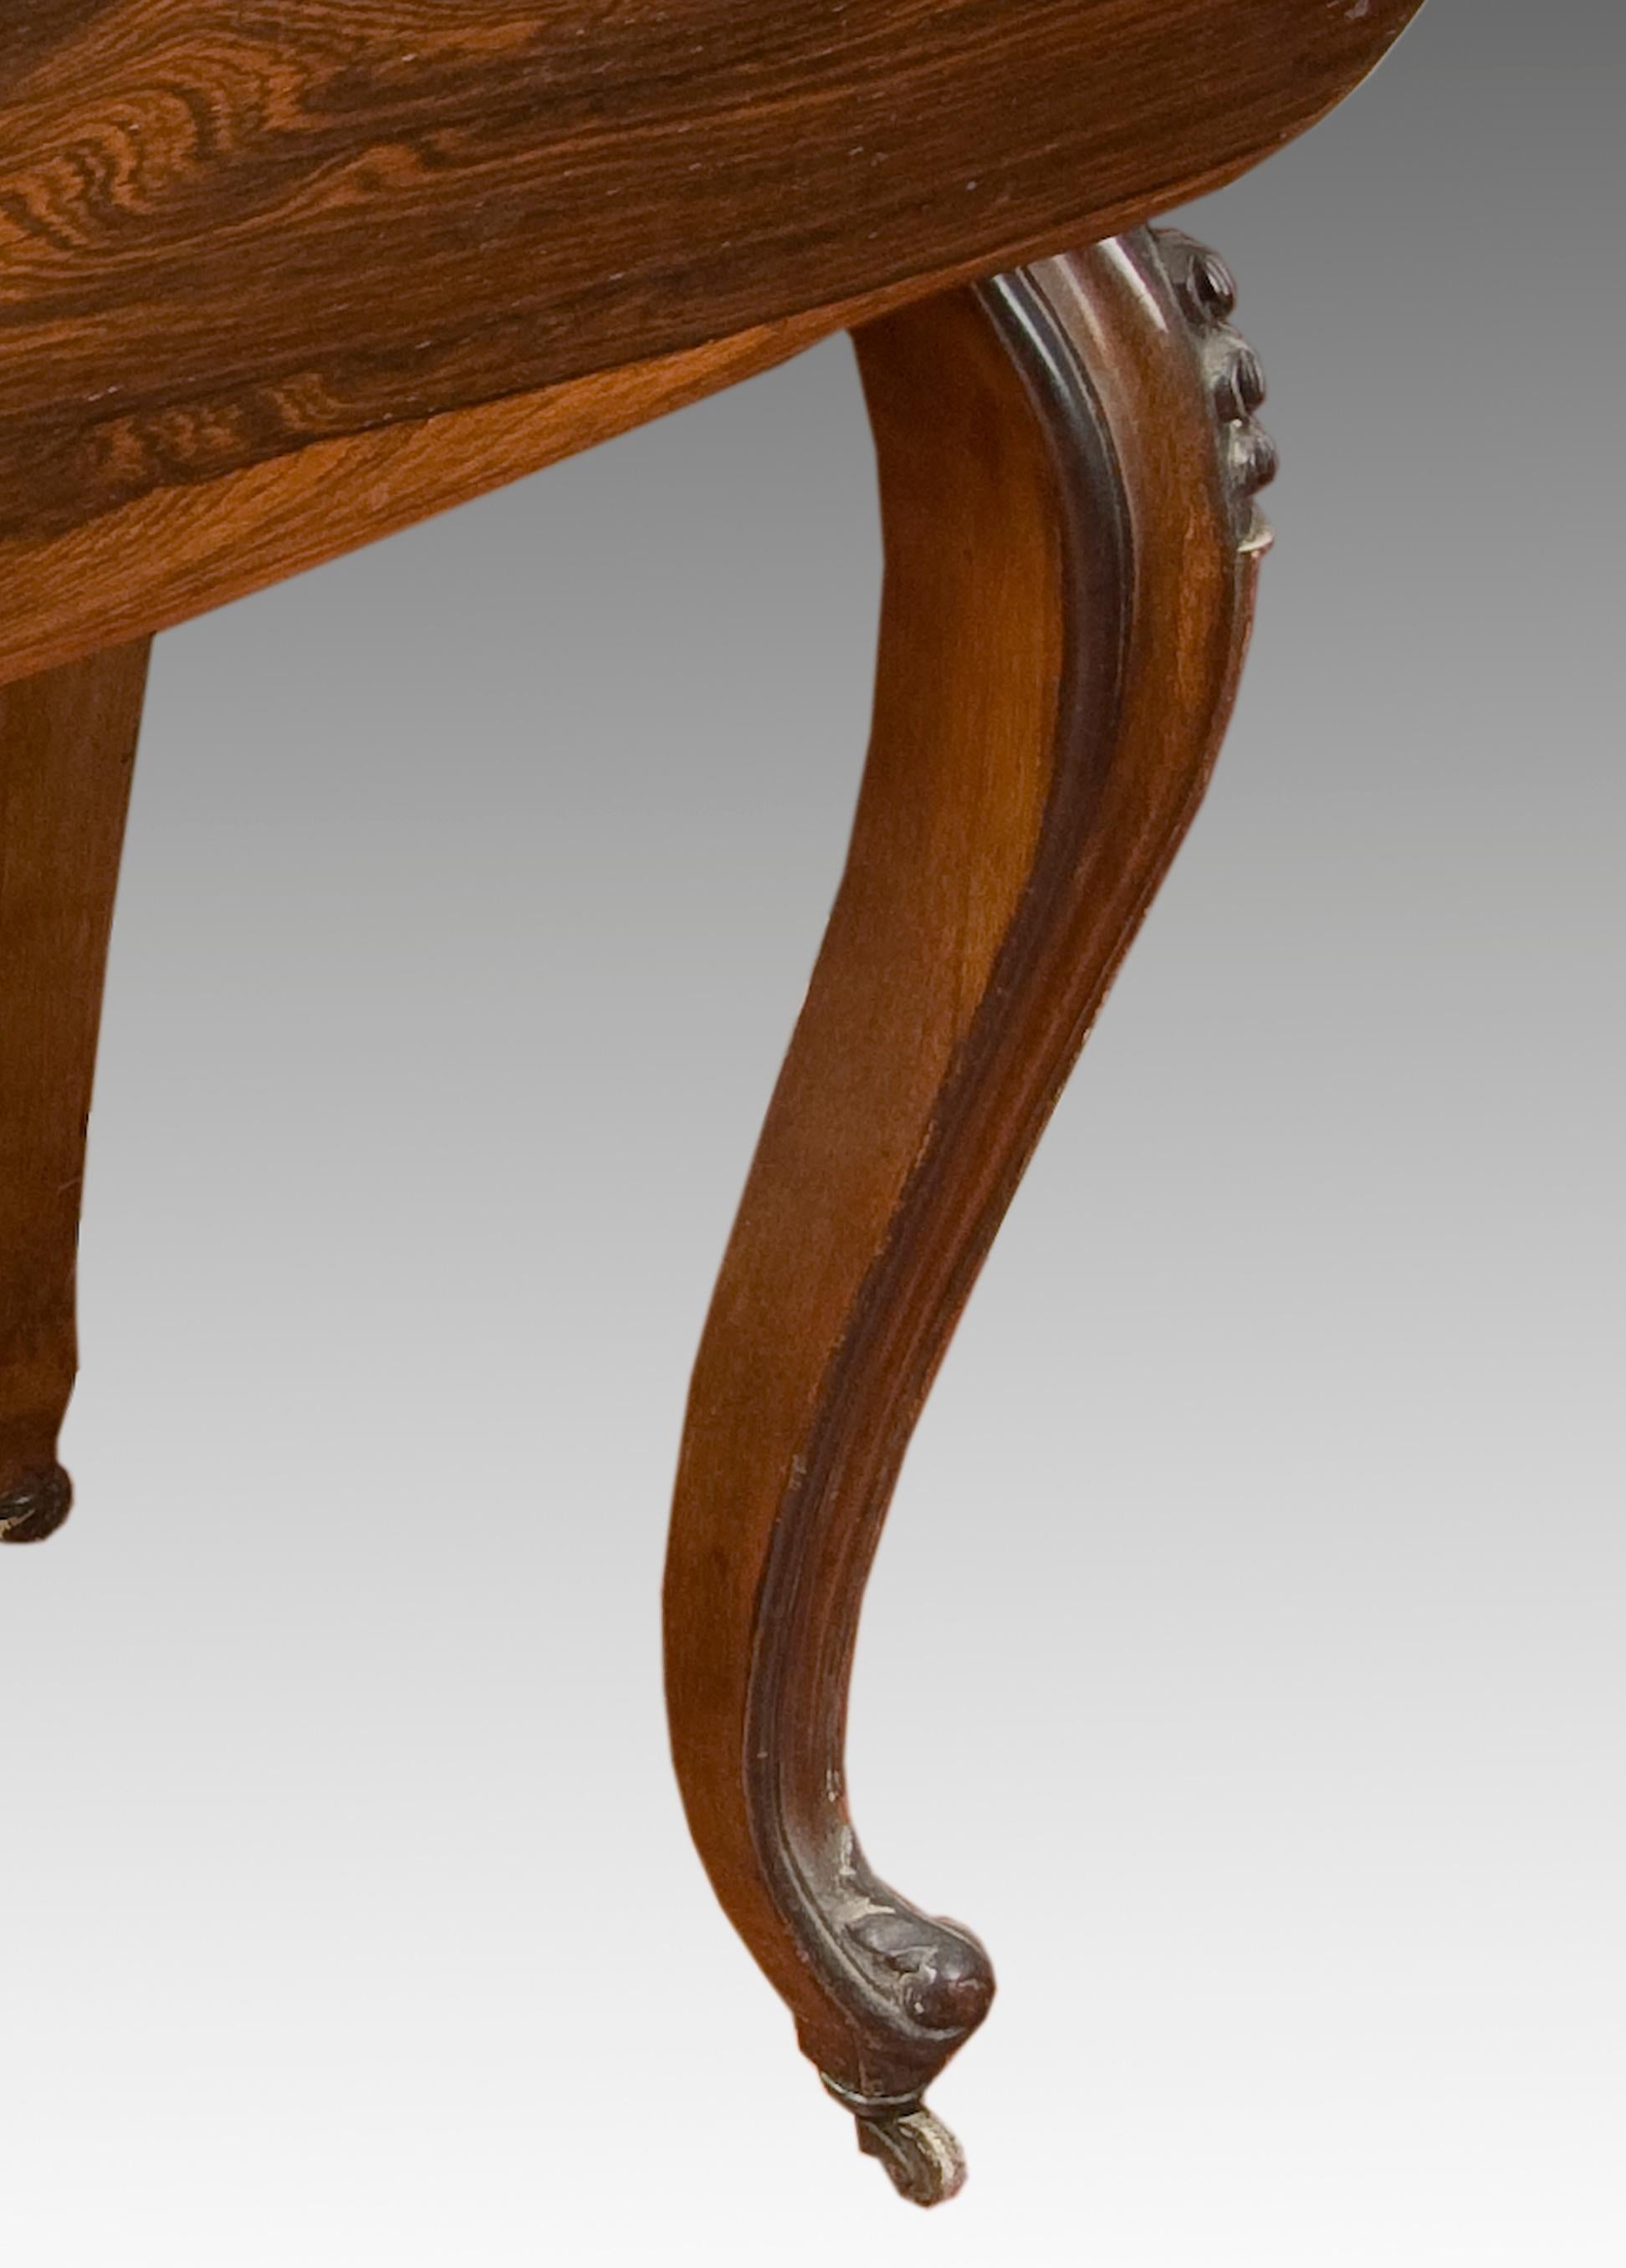 Other Sewing Table with Wings, Palosanto or Rosewood Wood, 19th Century For Sale